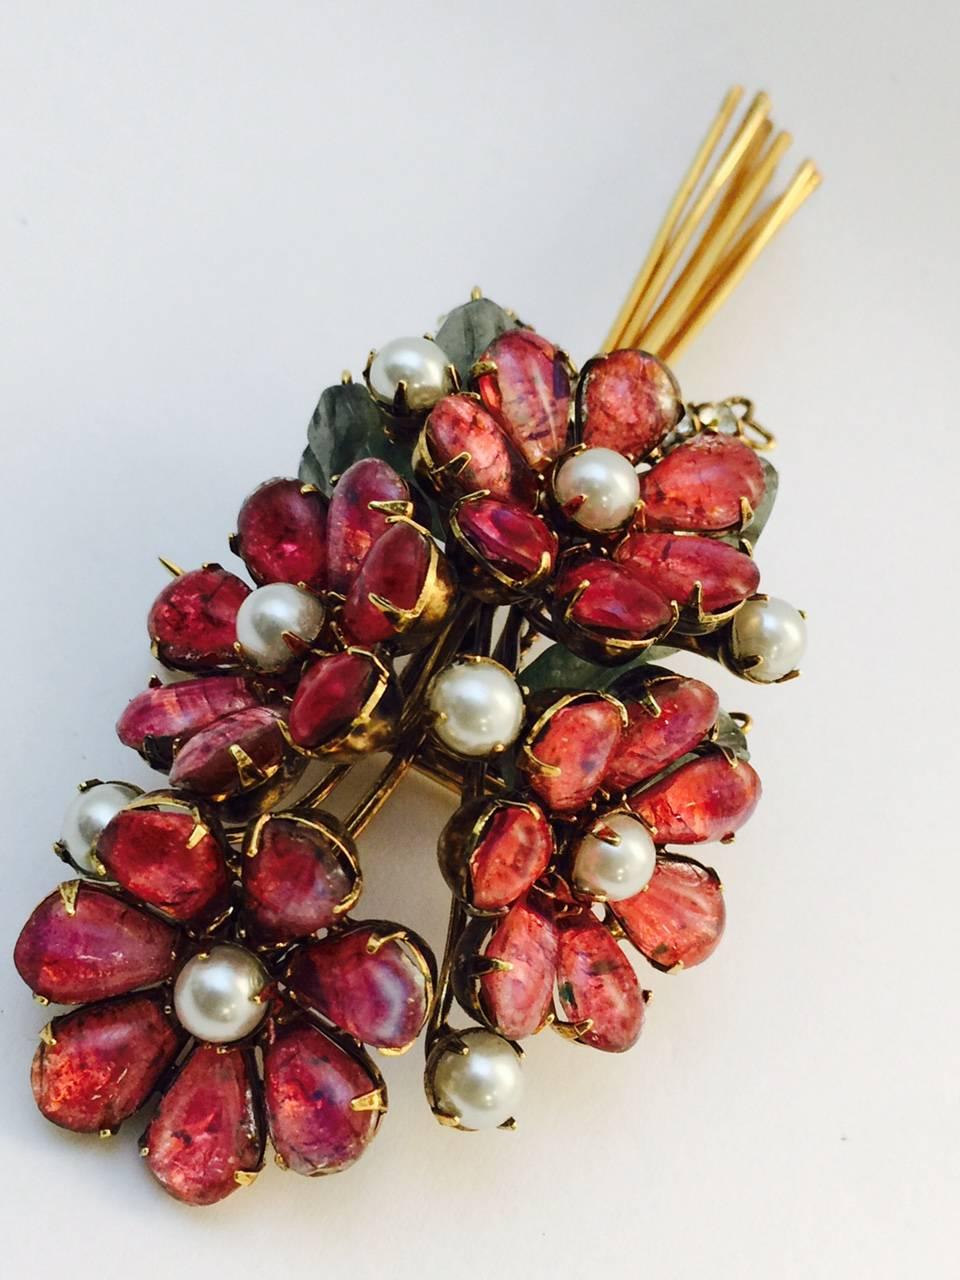 Vintage Iradj Moini Flower Bouquet Brooch is an unforgettable, statement piece! Features mottled pink pear shape petals, nine 5mm pearls, carved resin leaves and rhinestones. Brooch measures 4.5